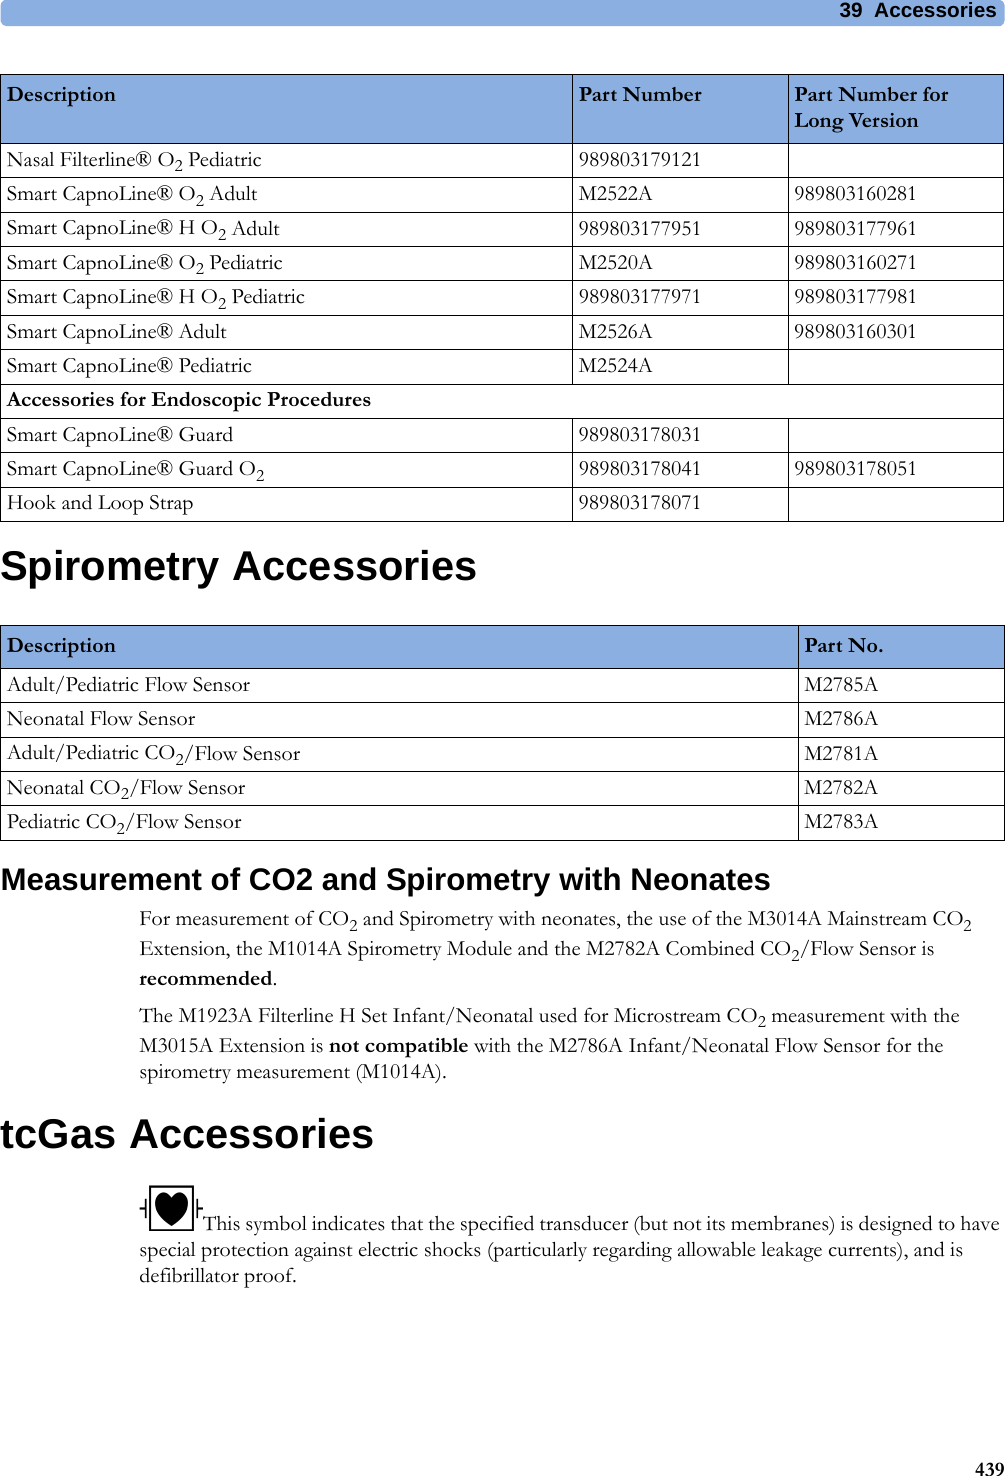 39 Accessories439Spirometry AccessoriesMeasurement of CO2 and Spirometry with NeonatesFor measurement of CO2 and Spirometry with neonates, the use of the M3014A Mainstream CO2 Extension, the M1014A Spirometry Module and the M2782A Combined CO2/Flow Sensor is recommended.The M1923A Filterline H Set Infant/Neonatal used for Microstream CO2 measurement with the M3015A Extension is not compatible with the M2786A Infant/Neonatal Flow Sensor for the spirometry measurement (M1014A).tcGas AccessoriesThis symbol indicates that the specified transducer (but not its membranes) is designed to have special protection against electric shocks (particularly regarding allowable leakage currents), and is defibrillator proof.Nasal Filterline® O2 Pediatric 989803179121Smart CapnoLine® O2 Adult M2522A 989803160281Smart CapnoLine® H O2 Adult 989803177951 989803177961Smart CapnoLine® O2 Pediatric M2520A 989803160271Smart CapnoLine® H O2 Pediatric 989803177971 989803177981Smart CapnoLine® Adult M2526A 989803160301Smart CapnoLine® Pediatric M2524AAccessories for Endoscopic ProceduresSmart CapnoLine® Guard 989803178031Smart CapnoLine® Guard O2989803178041 989803178051Hook and Loop Strap 989803178071Description Part Number Part Number for Long Version Description Part No.Adult/Pediatric Flow Sensor M2785ANeonatal Flow Sensor M2786AAdult/Pediatric CO2/Flow Sensor M2781ANeonatal CO2/Flow Sensor M2782APediatric CO2/Flow Sensor M2783A